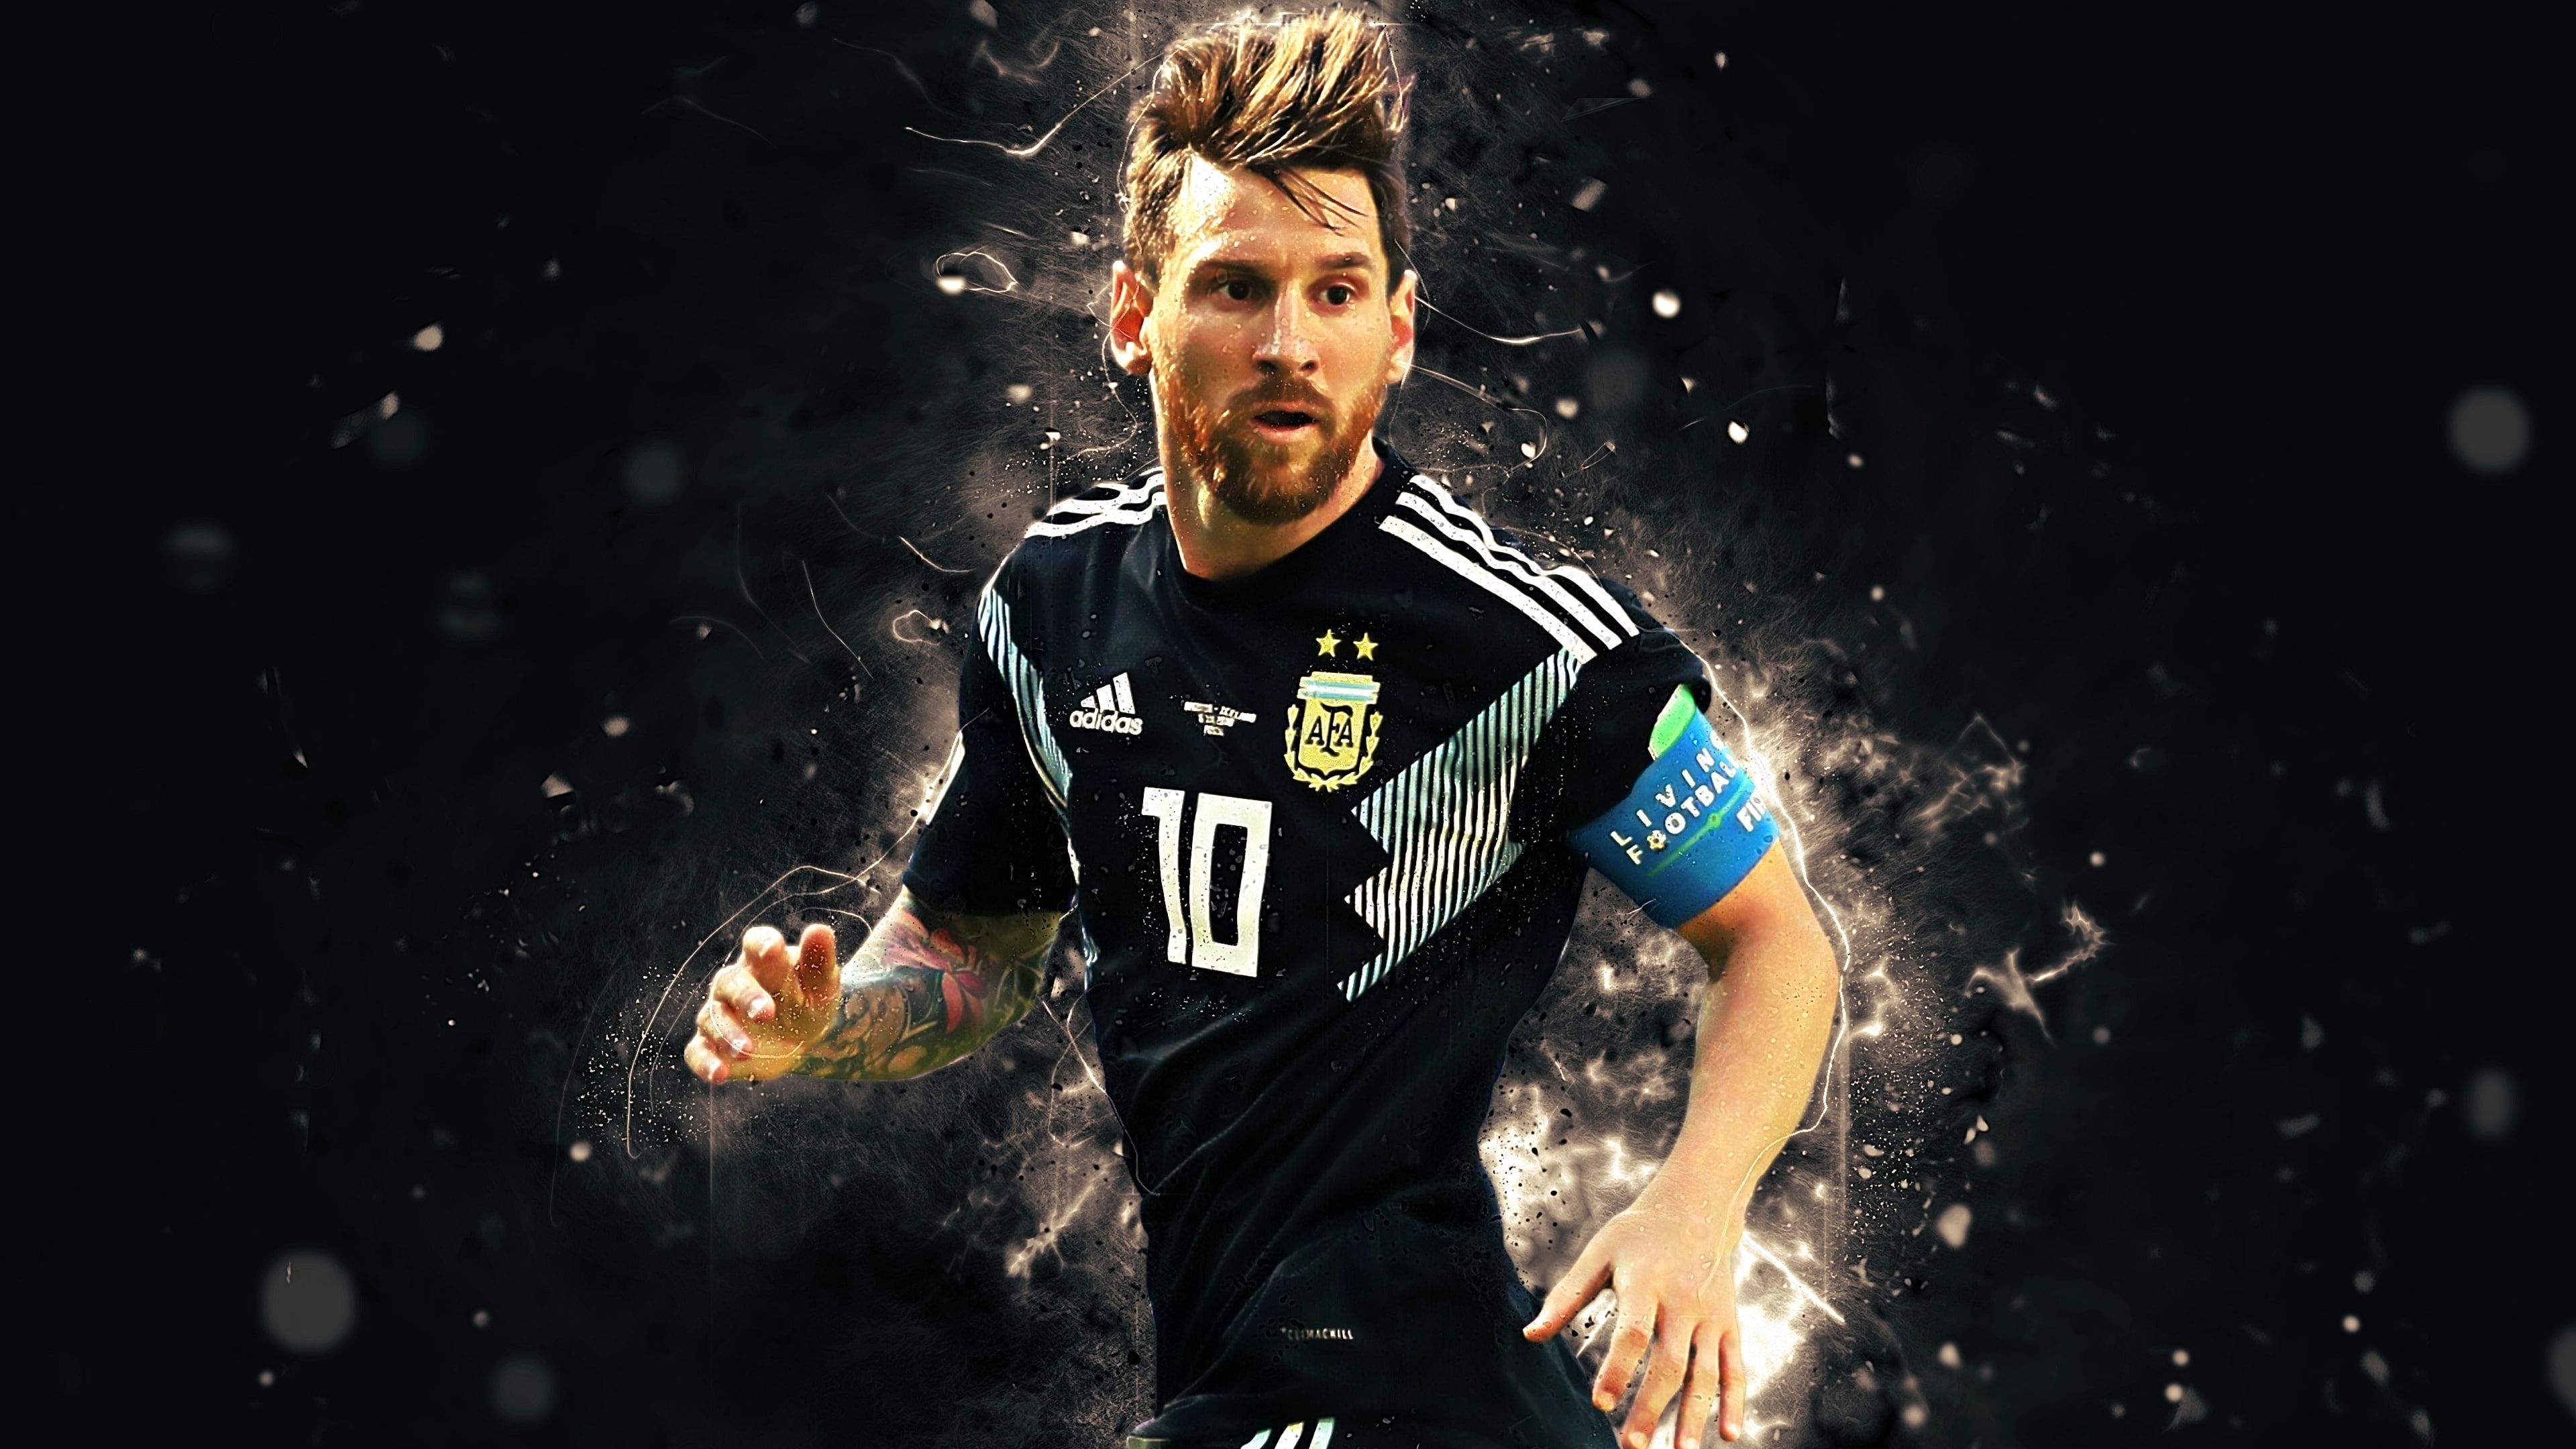 Lionel Messi Is Wearing Black Sports Dress In Black Backgrounds 4K HD Messi Wallpapers